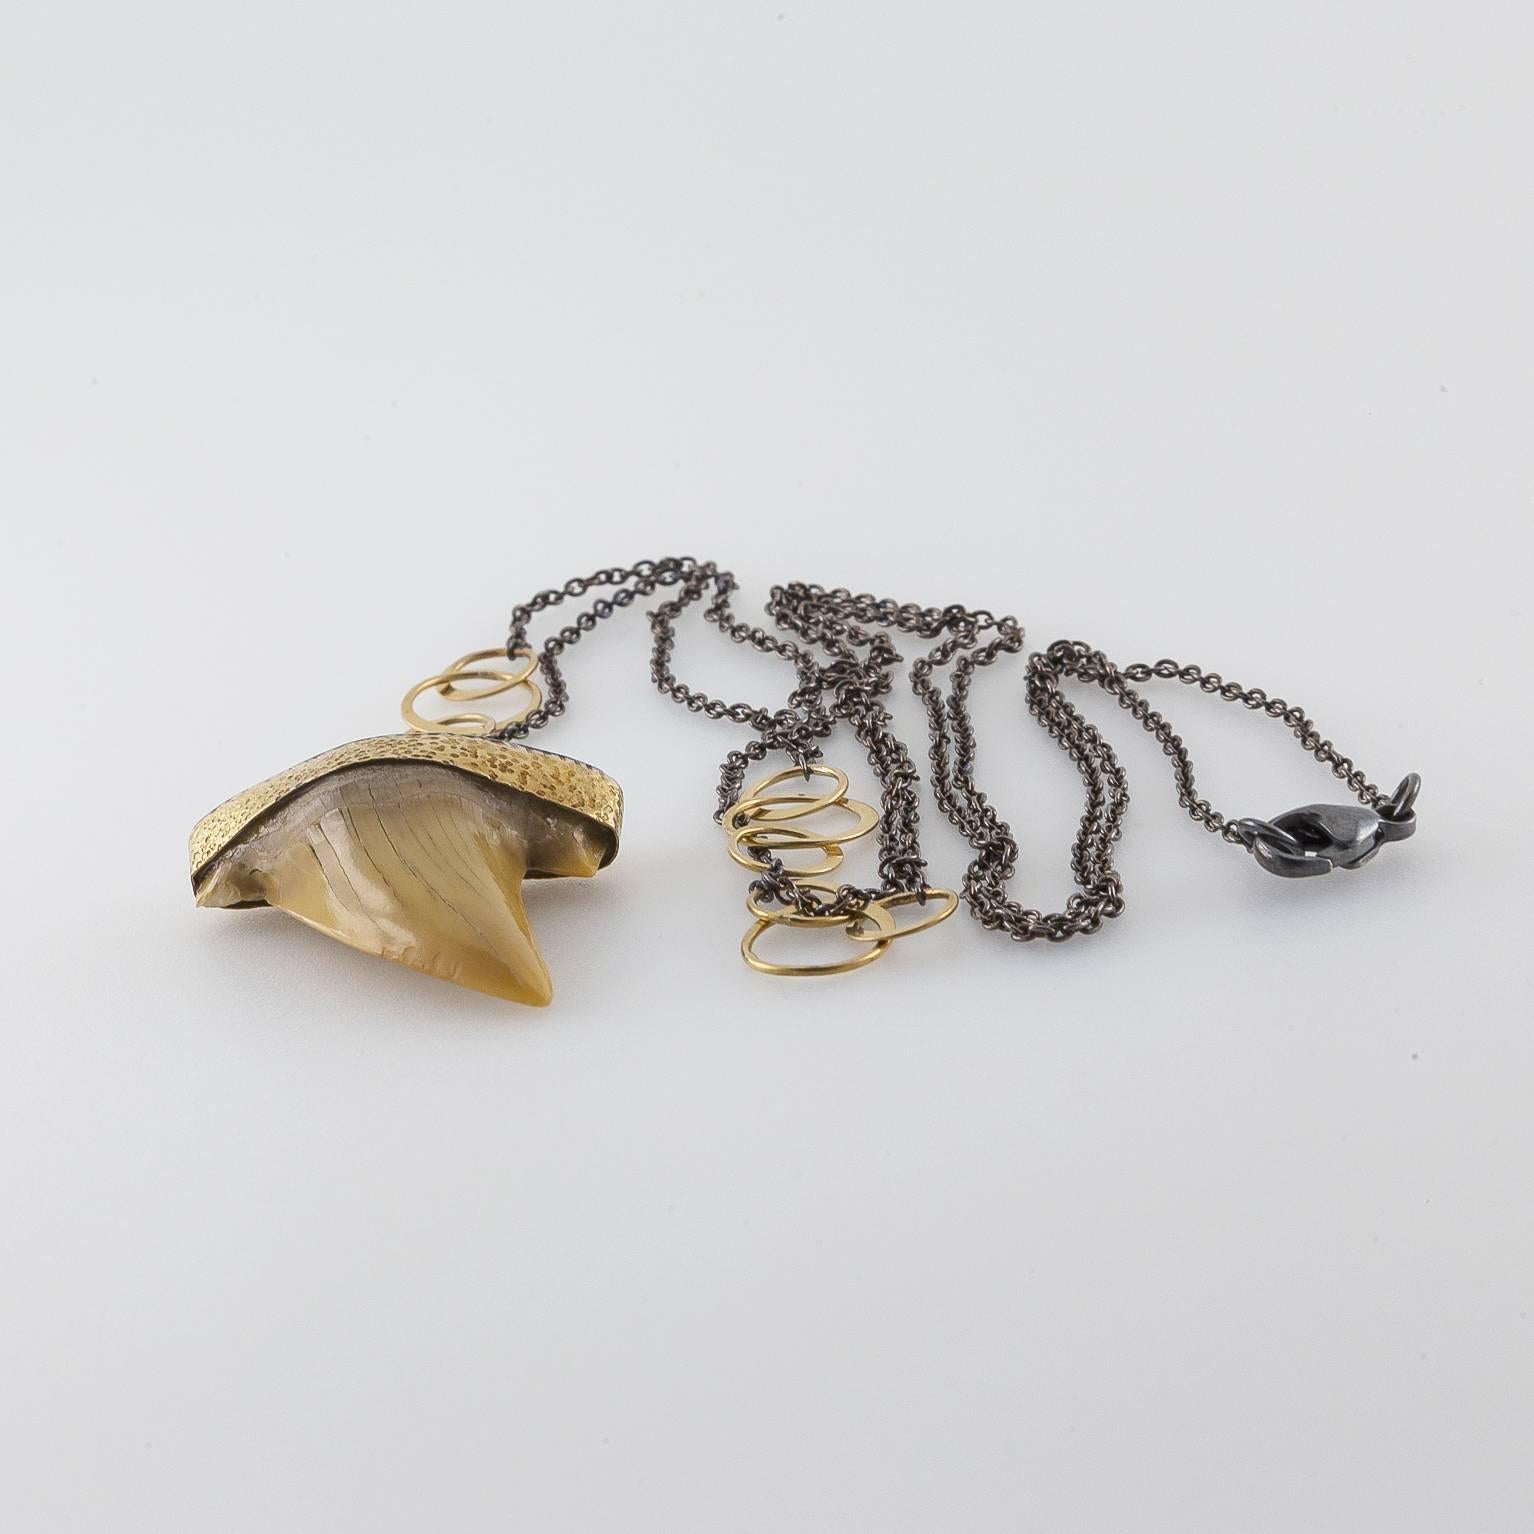 Modern Shark Tooth Pendant Necklace with Oxidized Silver and Gold